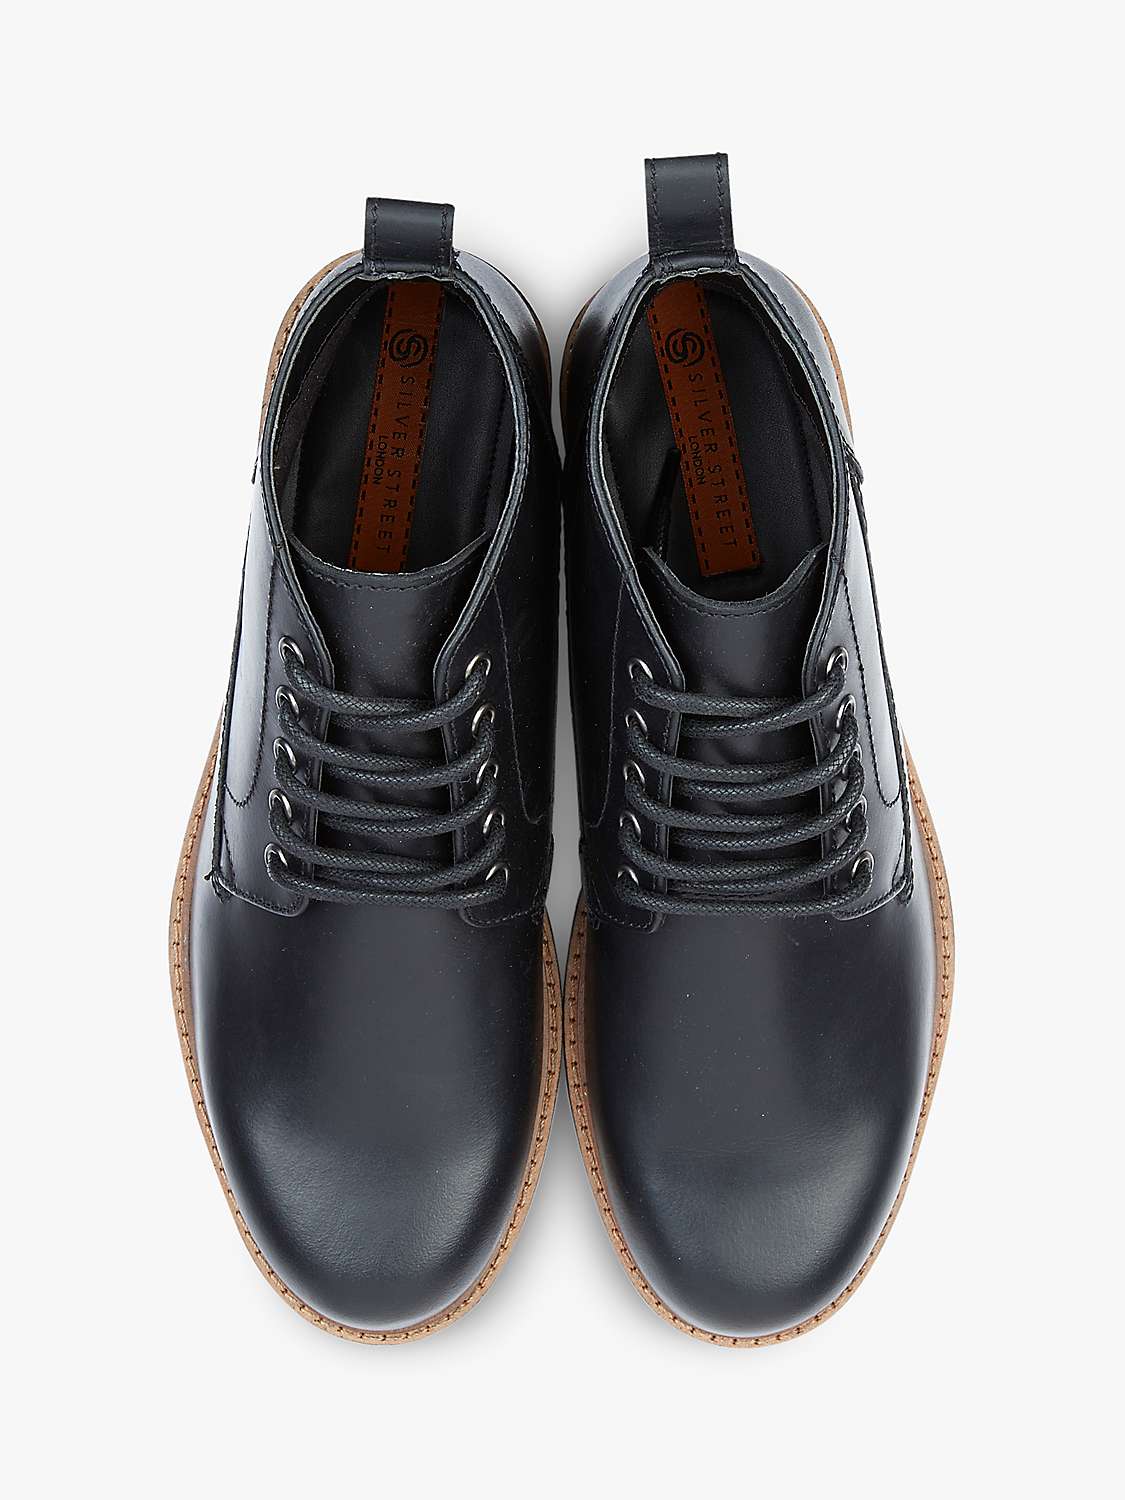 Buy Silver Street London Alderman Lace Up Leather Chukka Boots Online at johnlewis.com